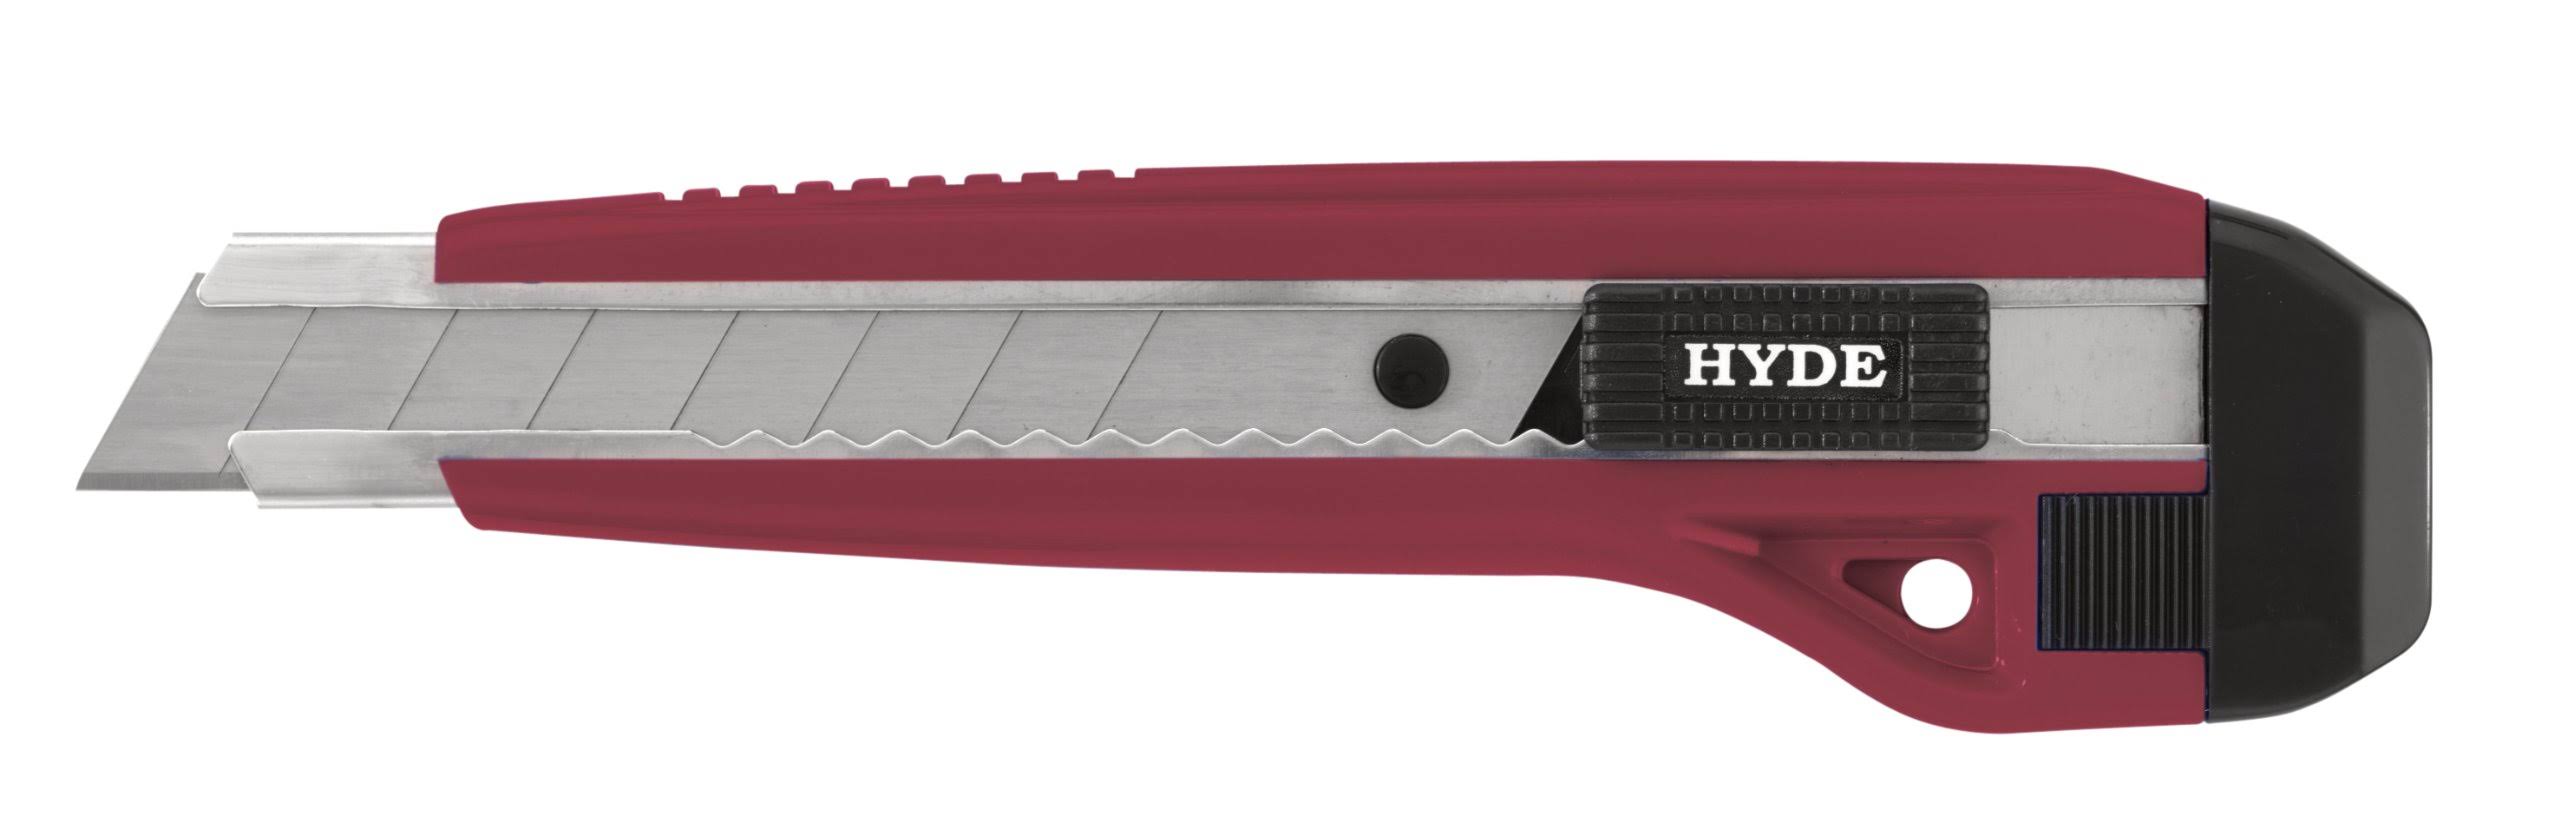 Hyde Tools 42030 Auto Lock Snap Off Blade Utility Knife - 18mm